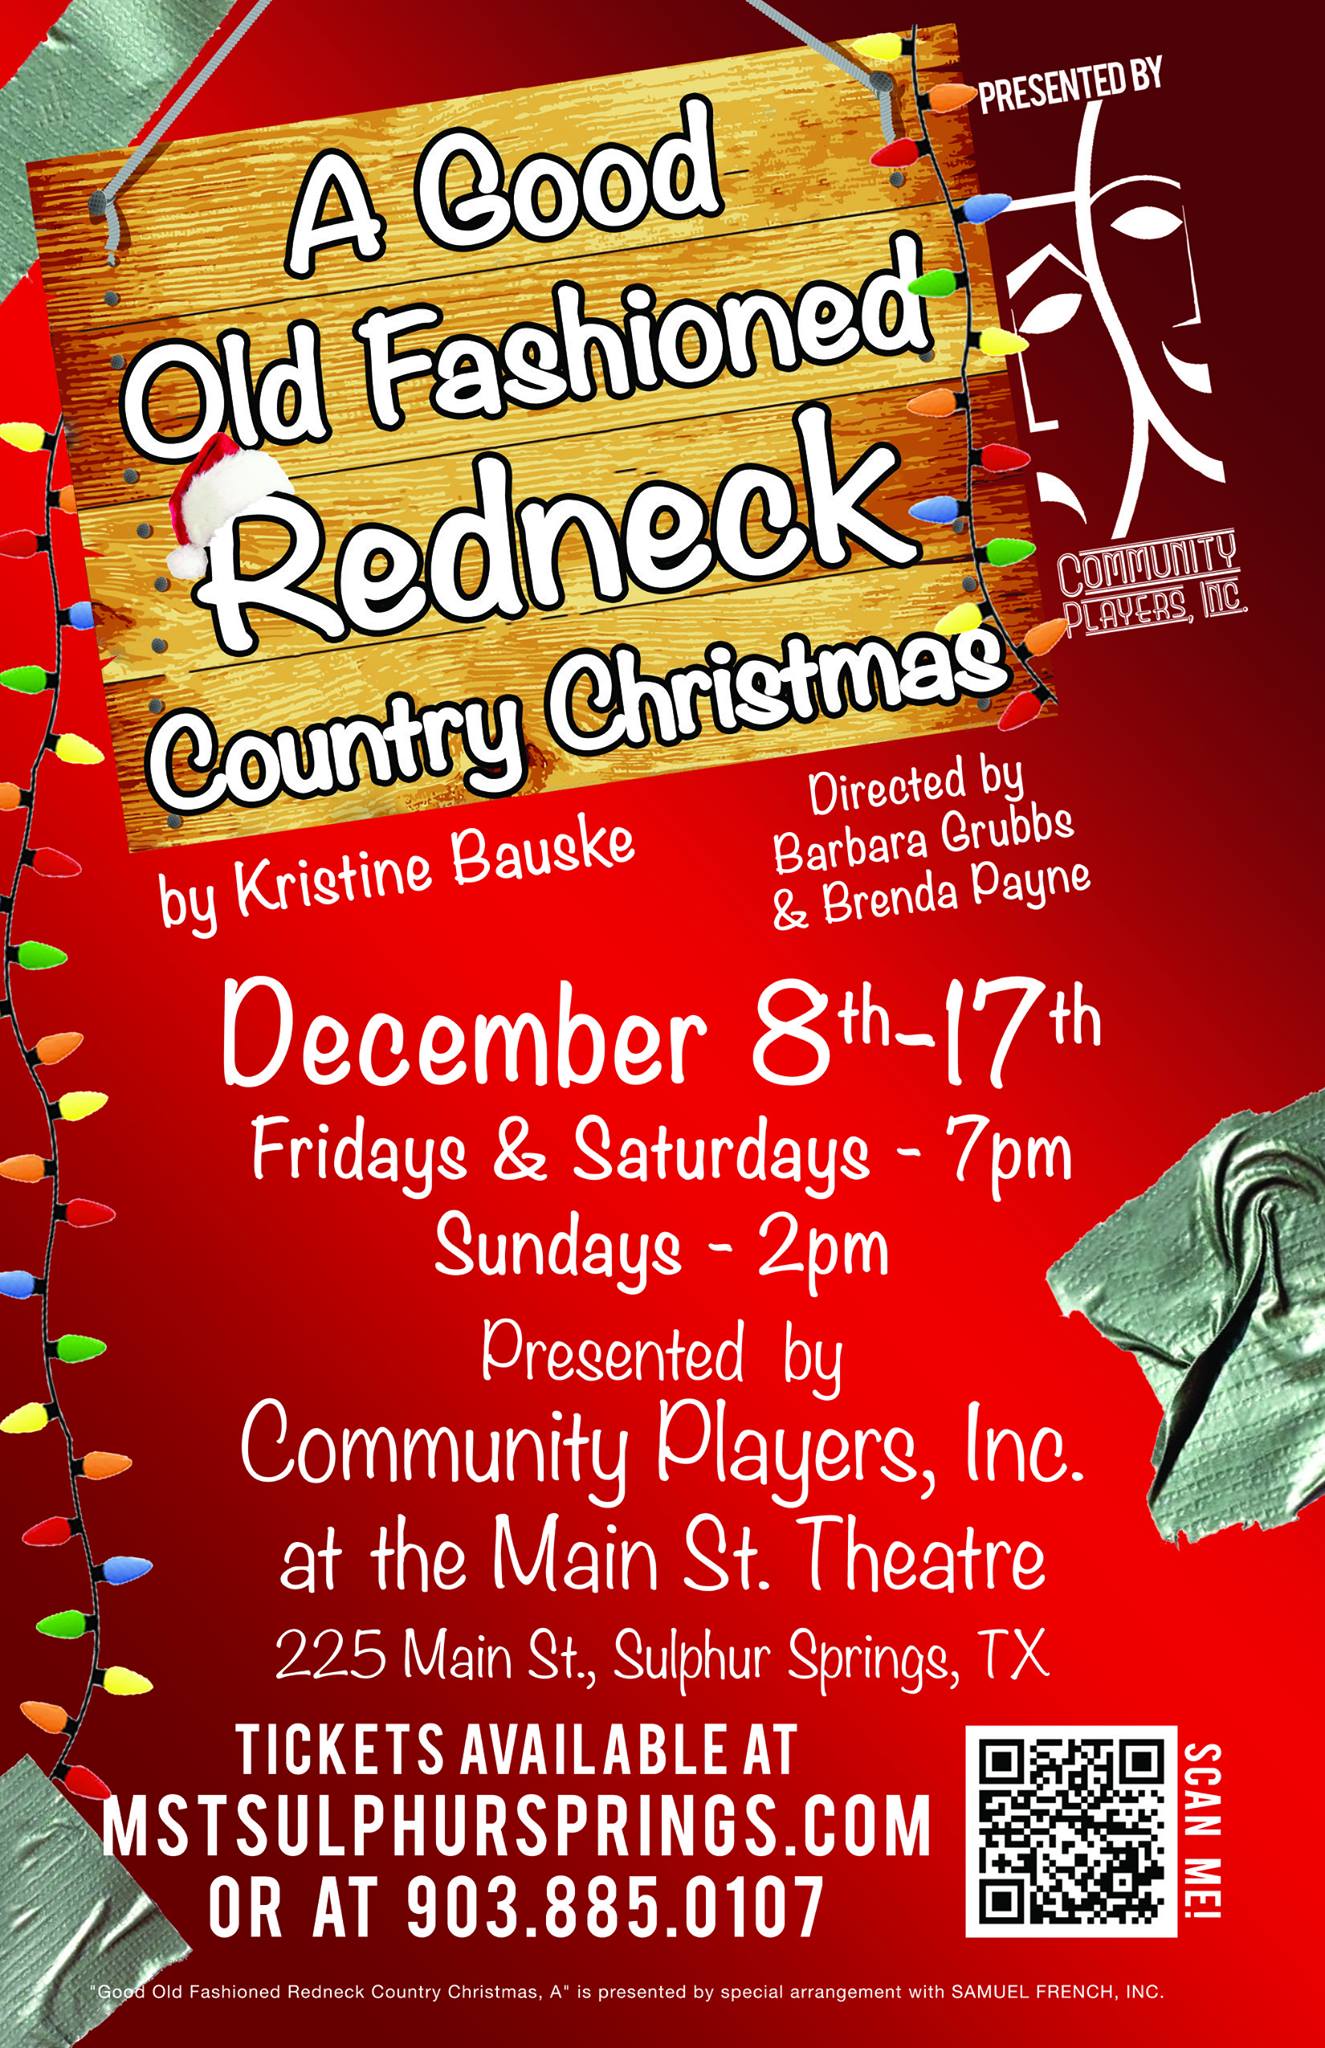 A Good Old Fashioned Redneck Country Christmas presented by Community Players Will Run December 8th-17th